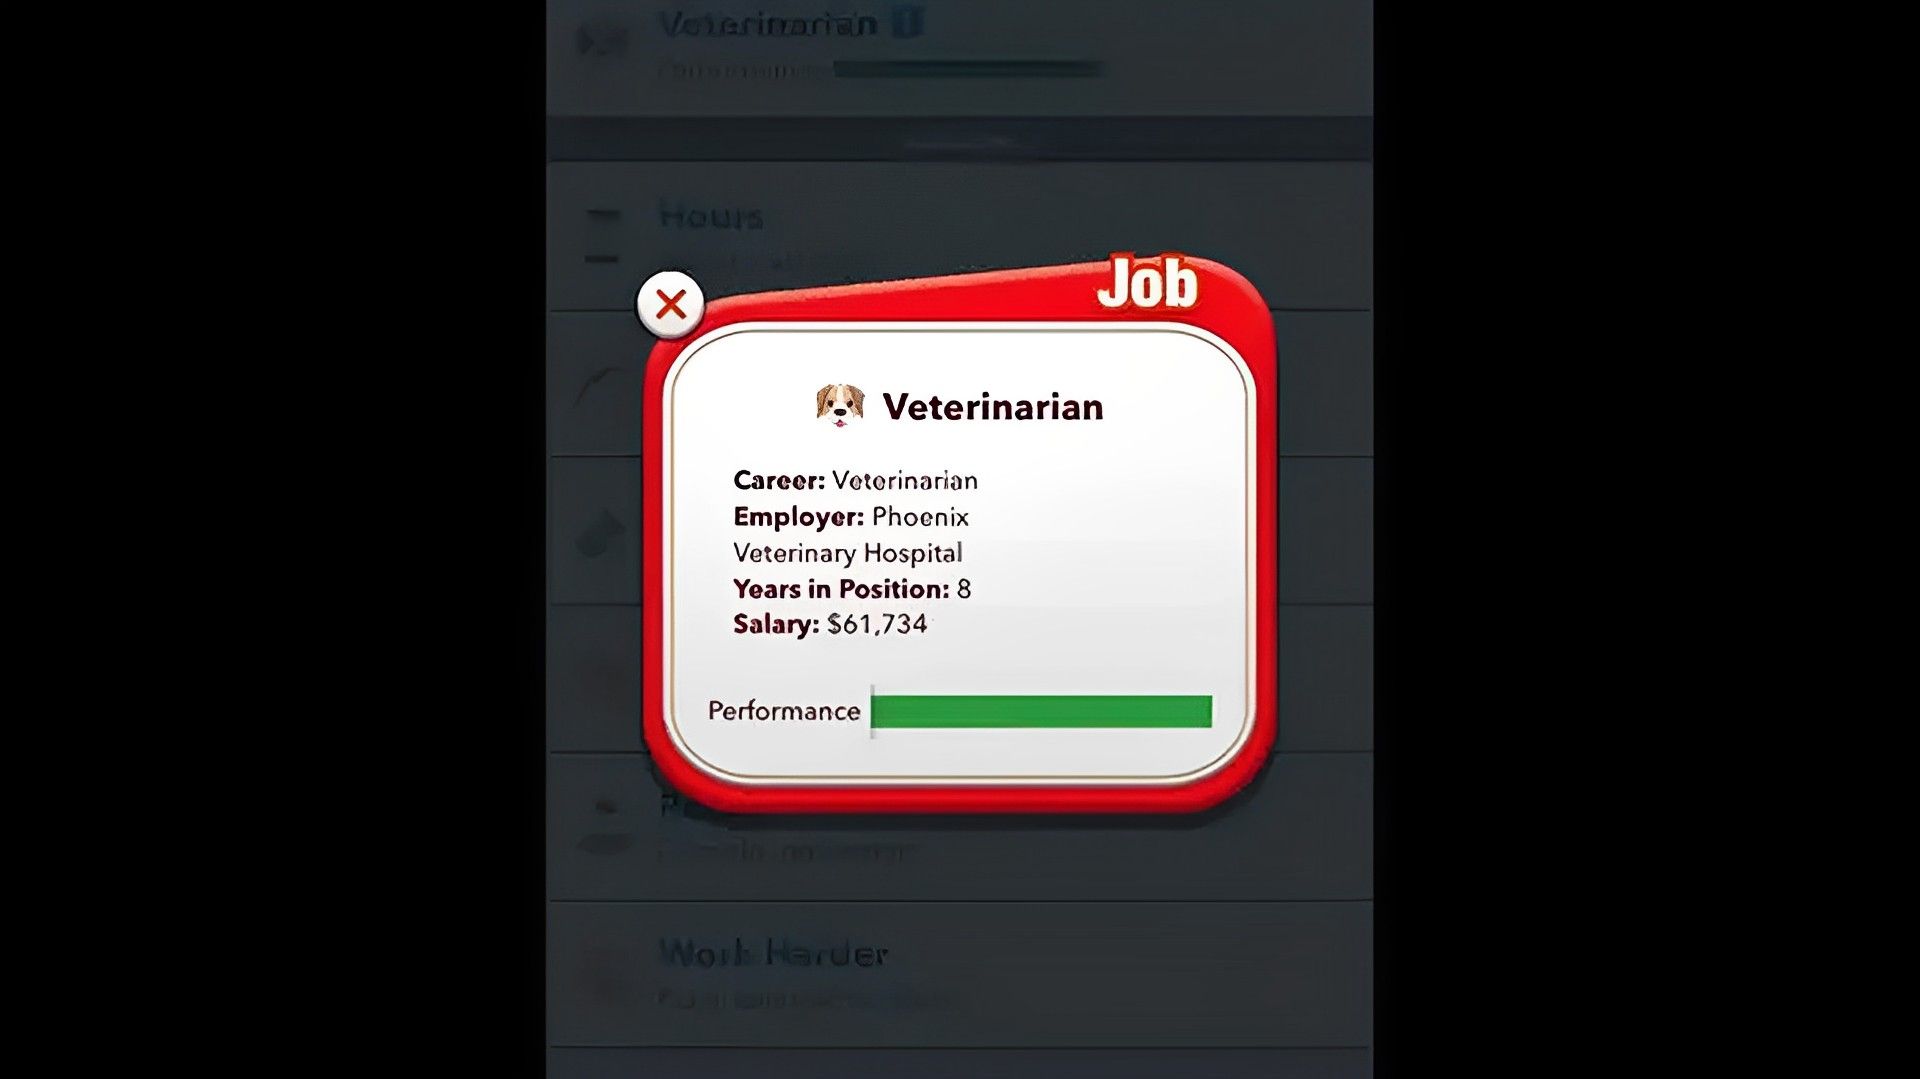 How to be a vet in BitLife